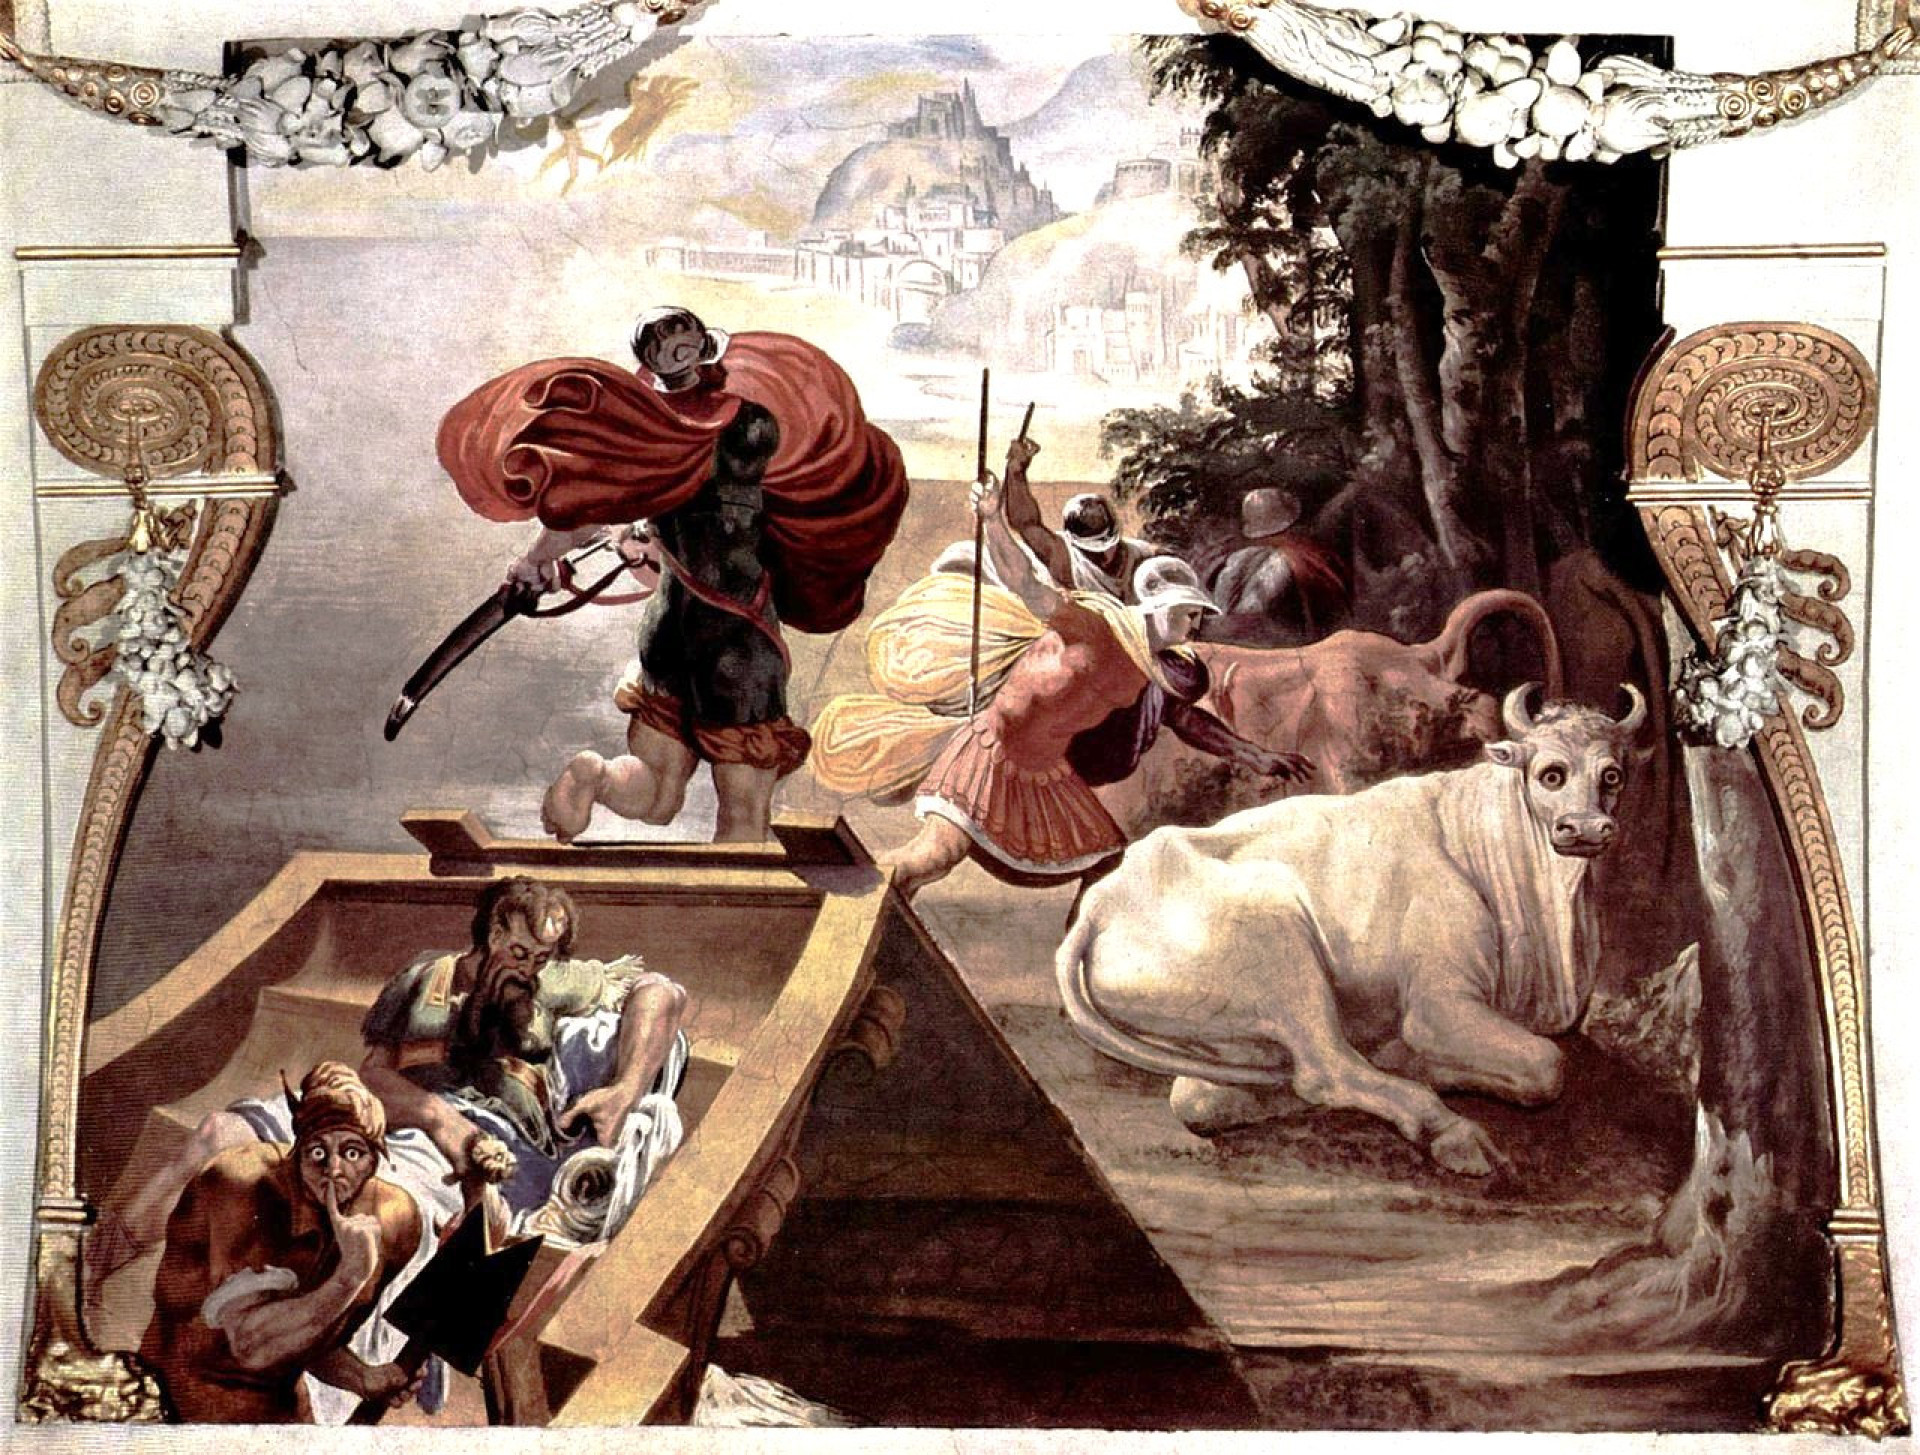 <p>Facing starvation, the crew eventually slaughtered the sacred cattle while Odysseus was asleep. This act of defiance angered Helios, who demanded retribution from Zeus. Once they set sail, Zeus sent a storm that destroyed the ship and drowned all of Odysseus' men. Only Odysseus survived, clinging to a piece of wreckage from his ship.</p><p>You may also like:<a href="https://www.starsinsider.com/n/403942?utm_source=msn.com&utm_medium=display&utm_campaign=referral_description&utm_content=739826en-us"> Disney stars: Then and now </a></p>